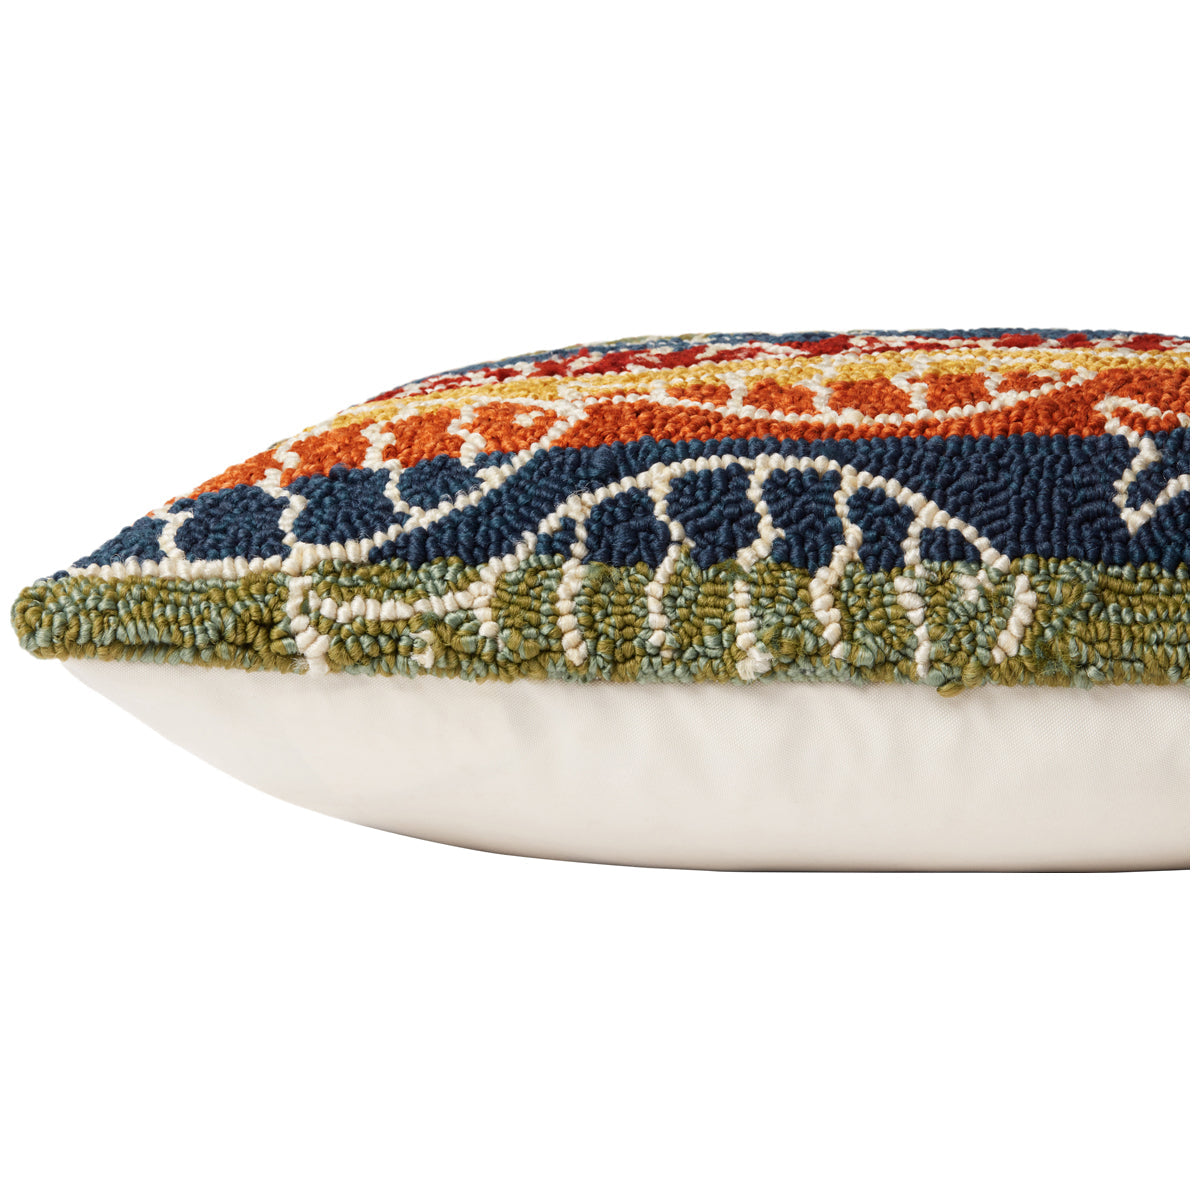 Loloi P0908 22" x 22" Hooked Pillow, Set of 2